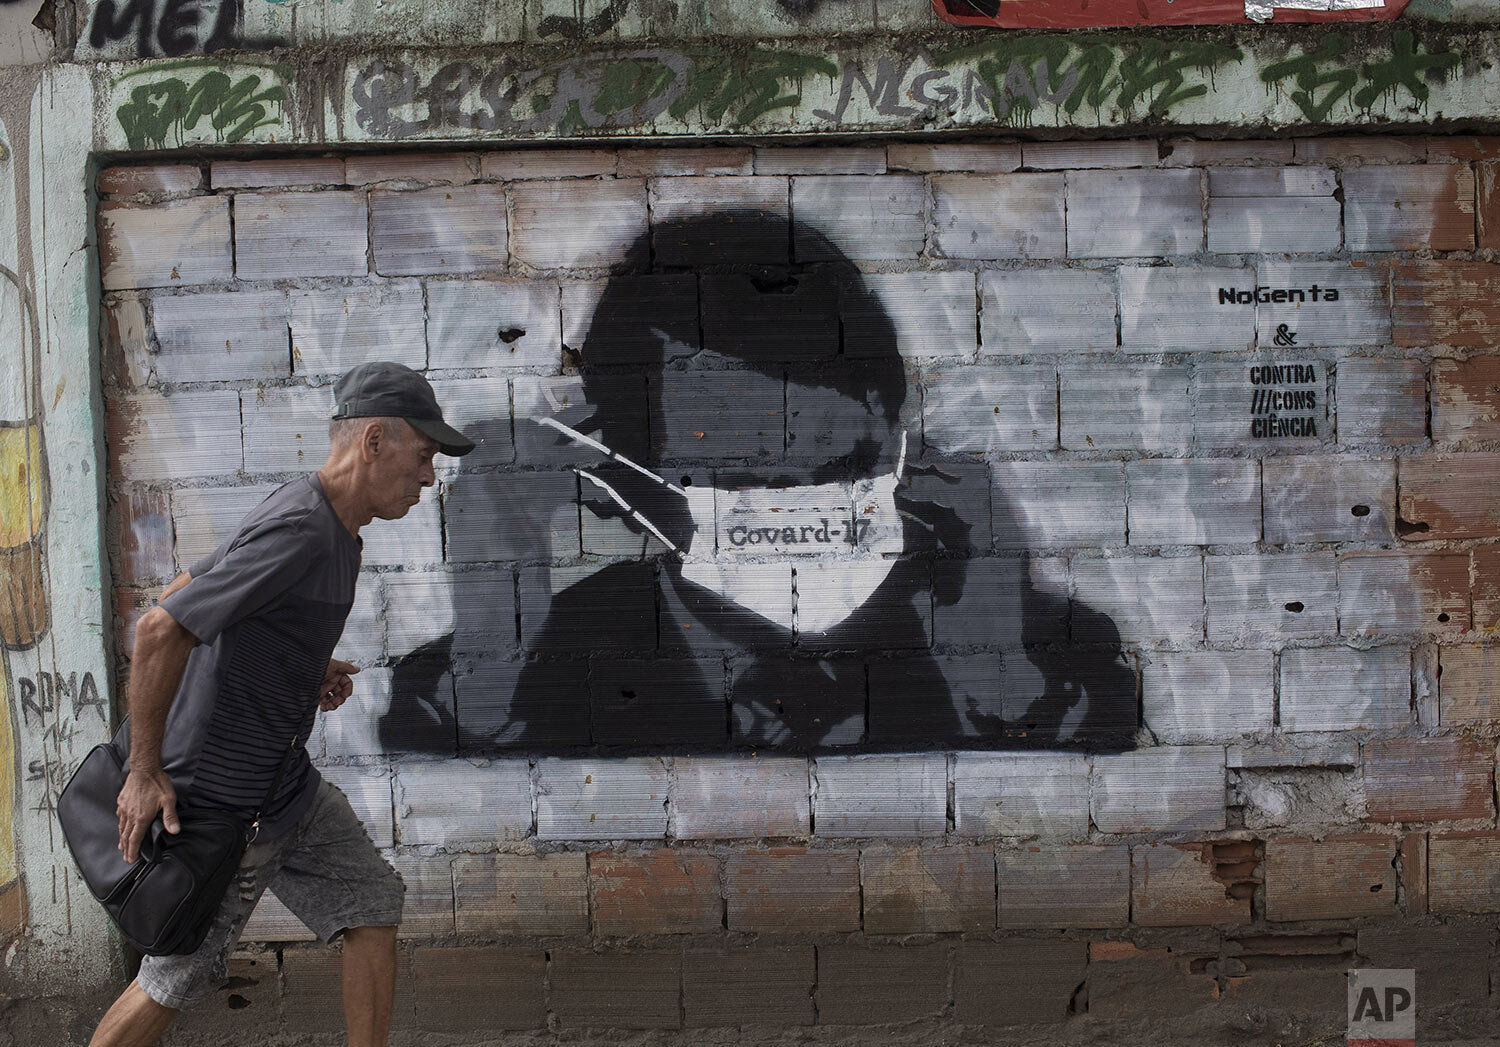  A man walks past a wall emblazoned with a mural depicting Brazil's President Jair Bolsonaro putting on a protective face mask with the Portuguese word for ÒcowardÓ written on it, in Rio de Janeiro, Brazil, April 7, 2020. (AP Photo/Silvia Izquierdo) 